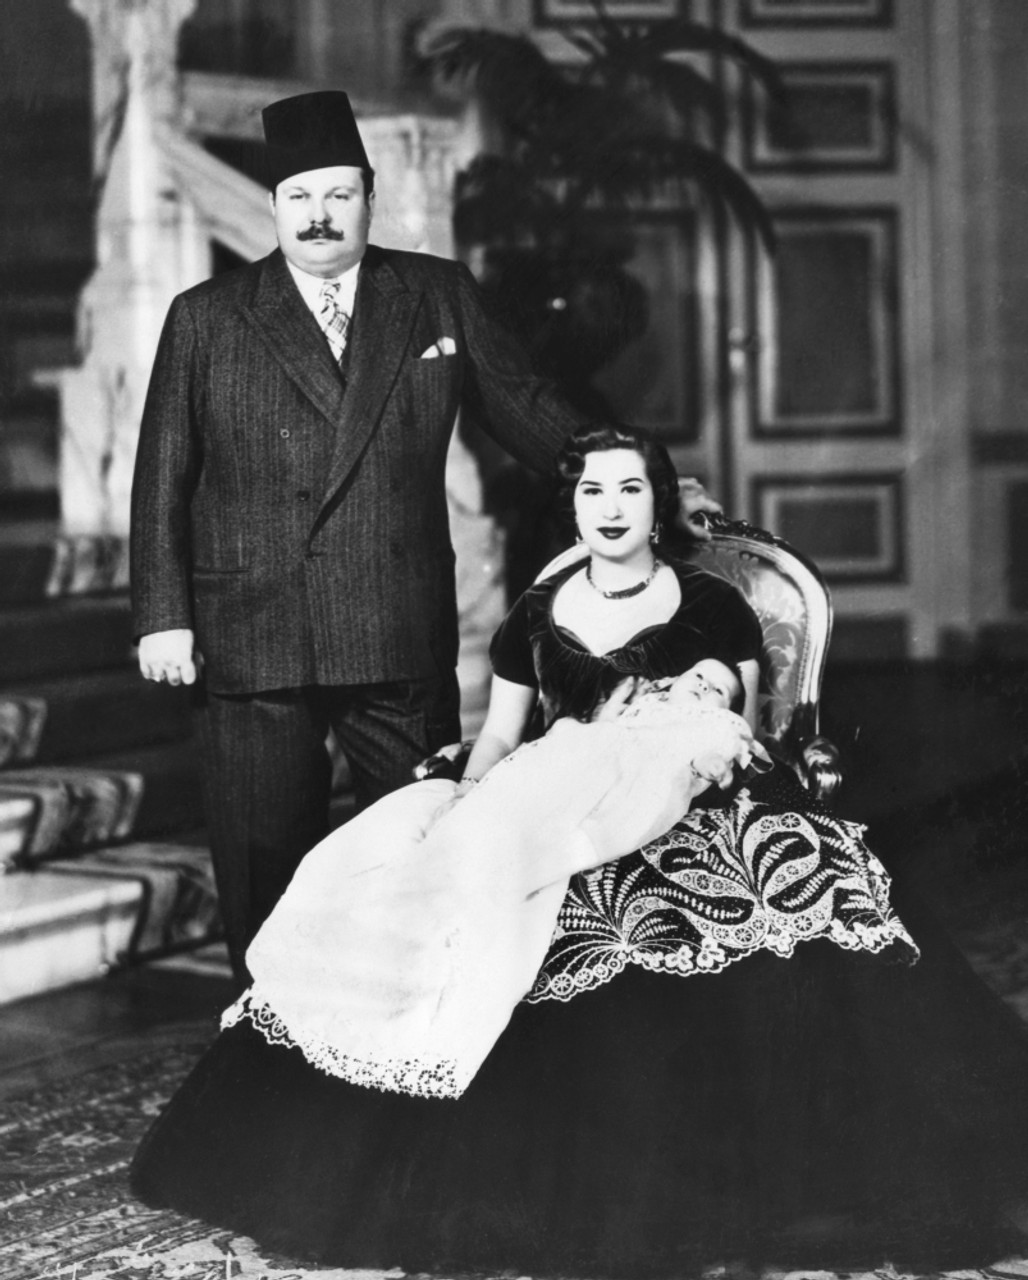 King Farouk and Queen Narriman with Prince Fuad in an official photo